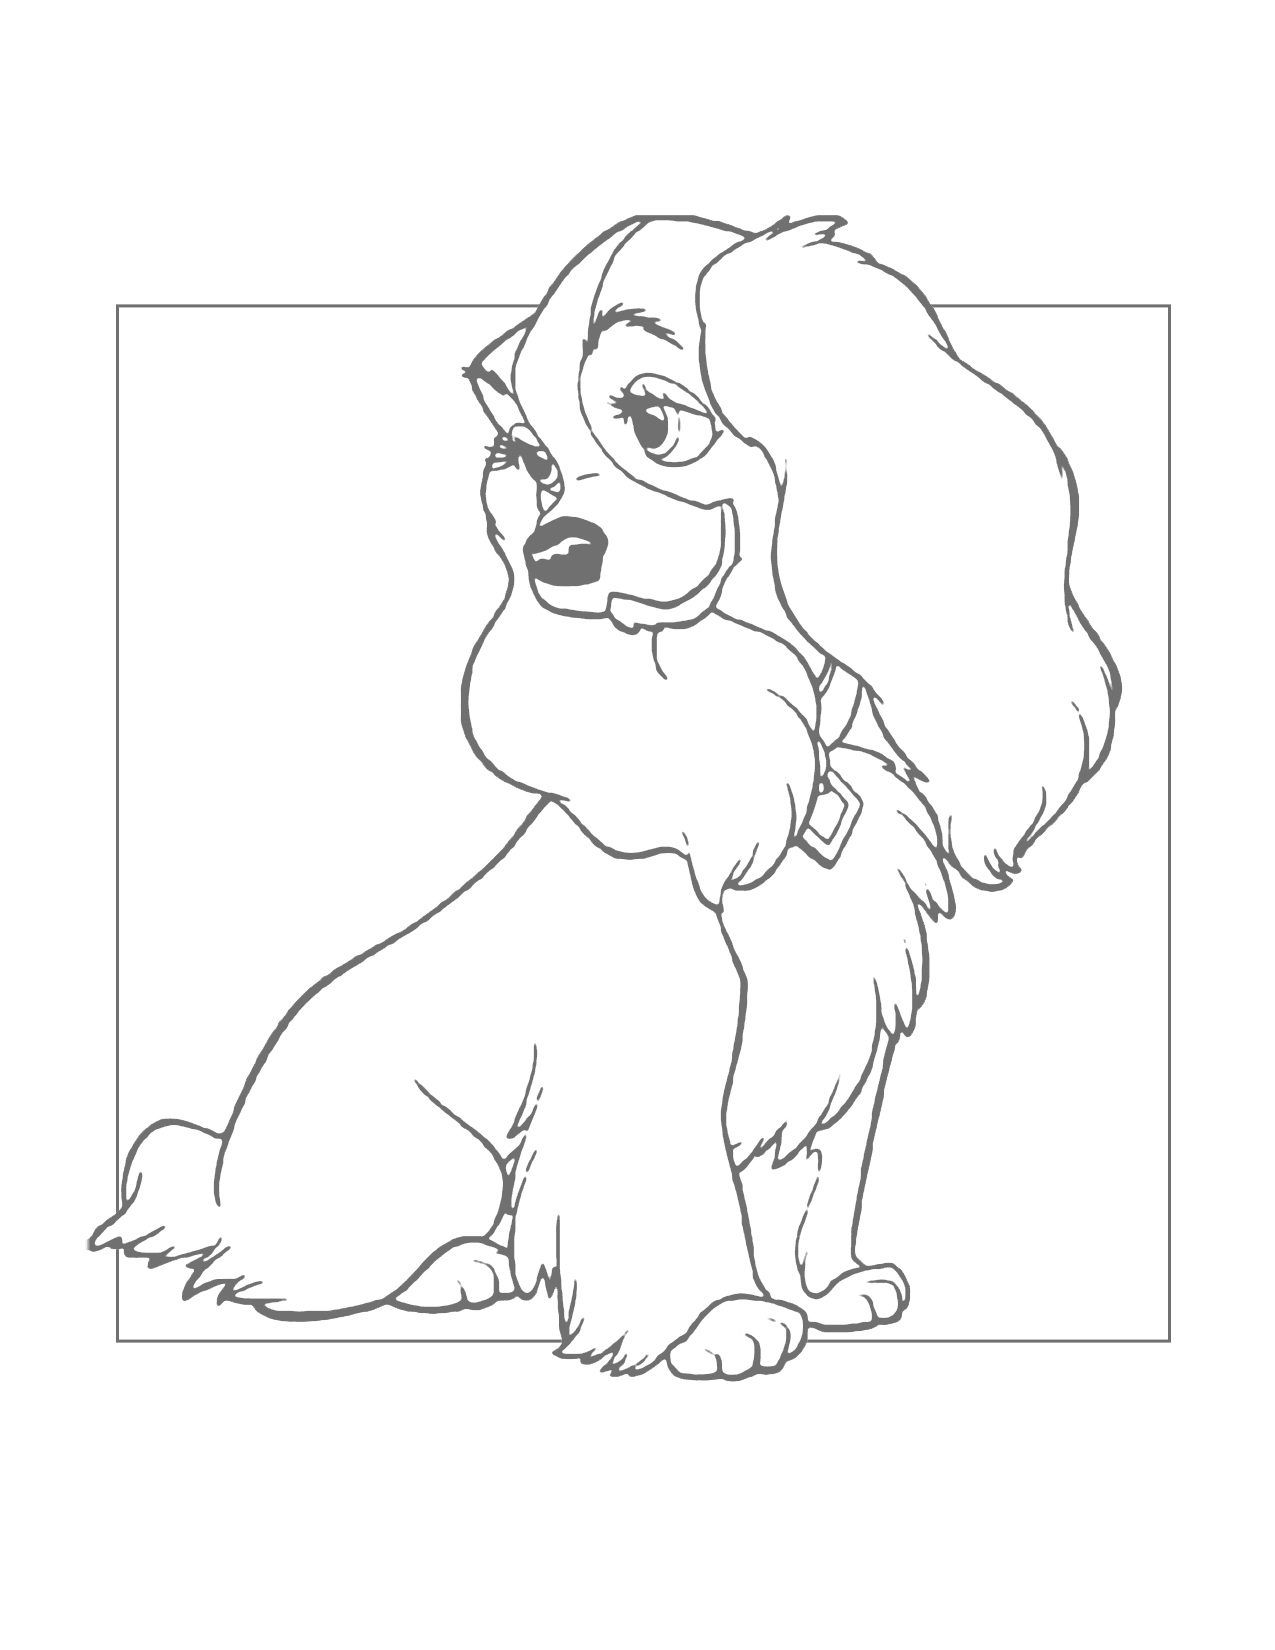 Lady From Lady And The Tramp Coloring Page